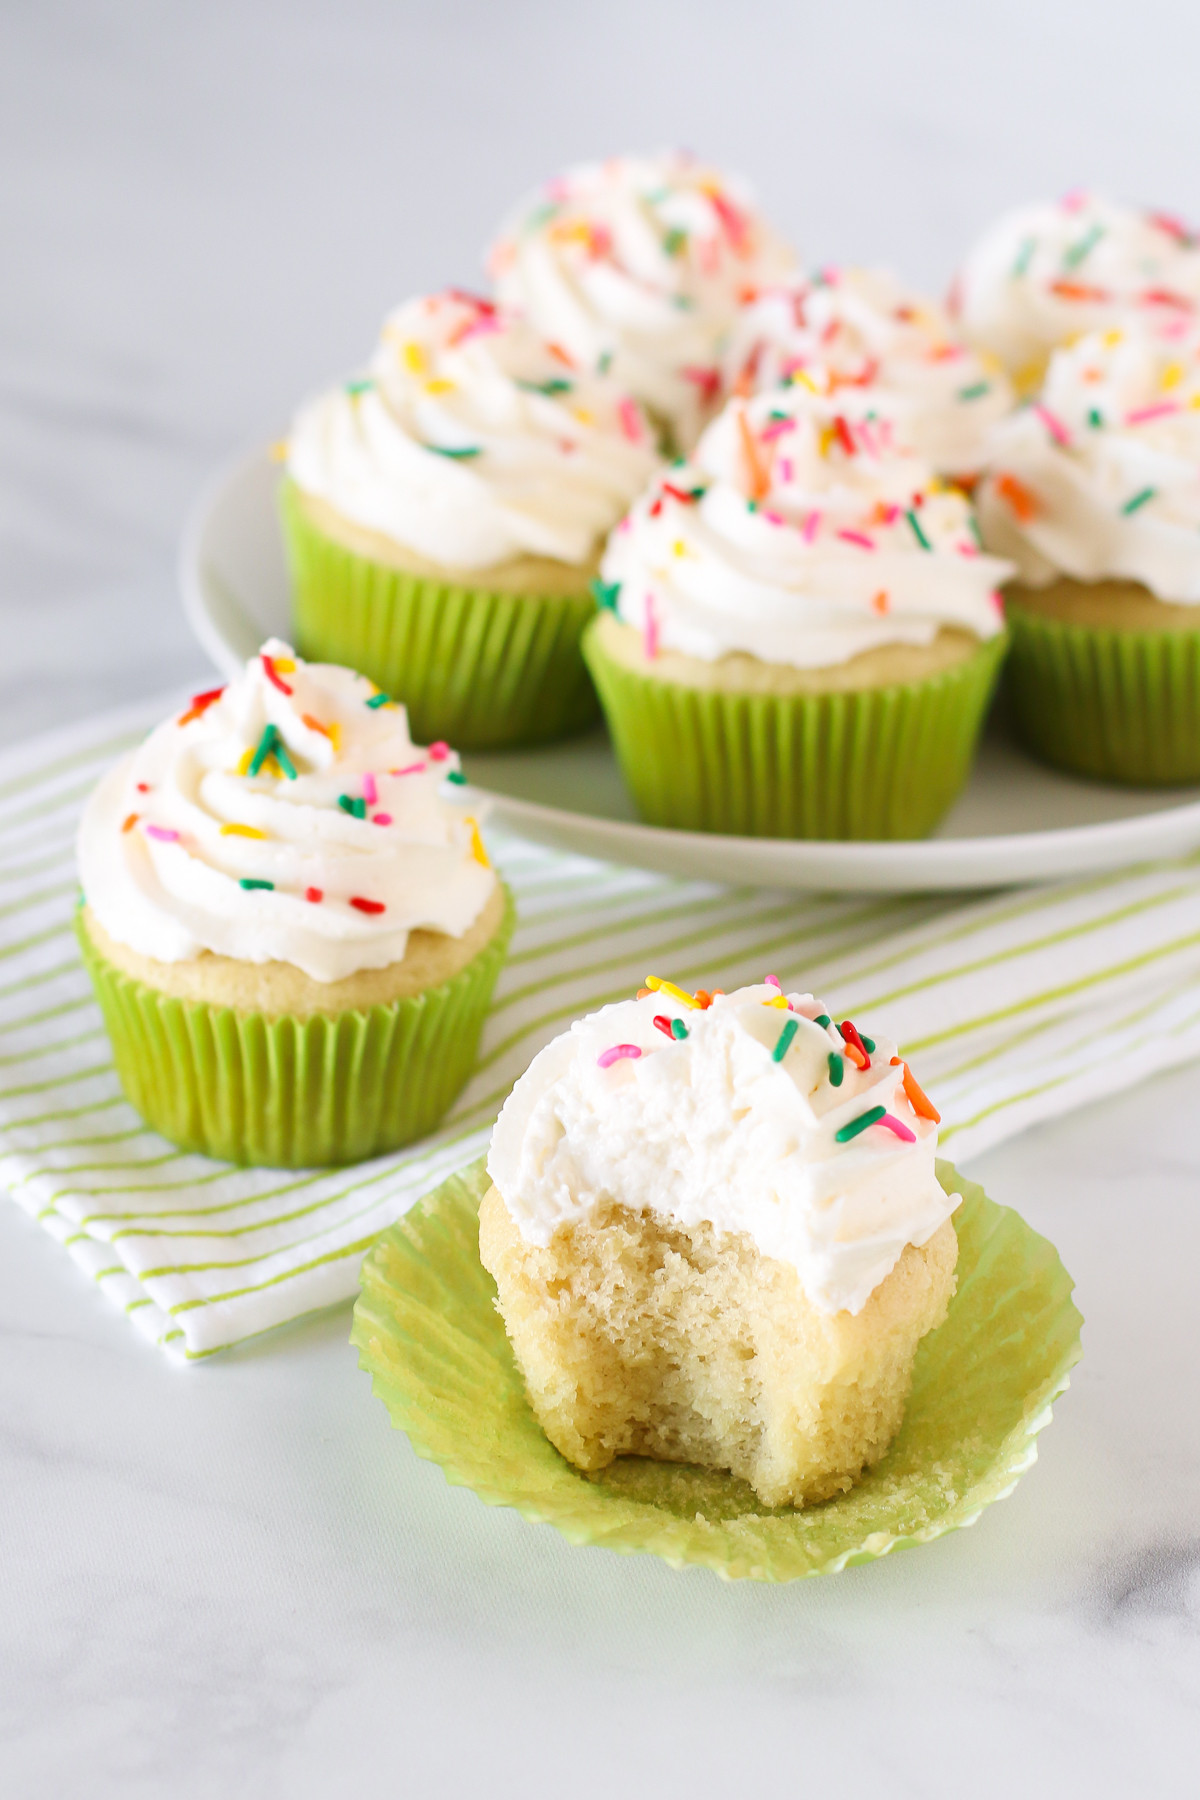 15 Dairy Free Cupcakes You Can Make In 5 Minutes